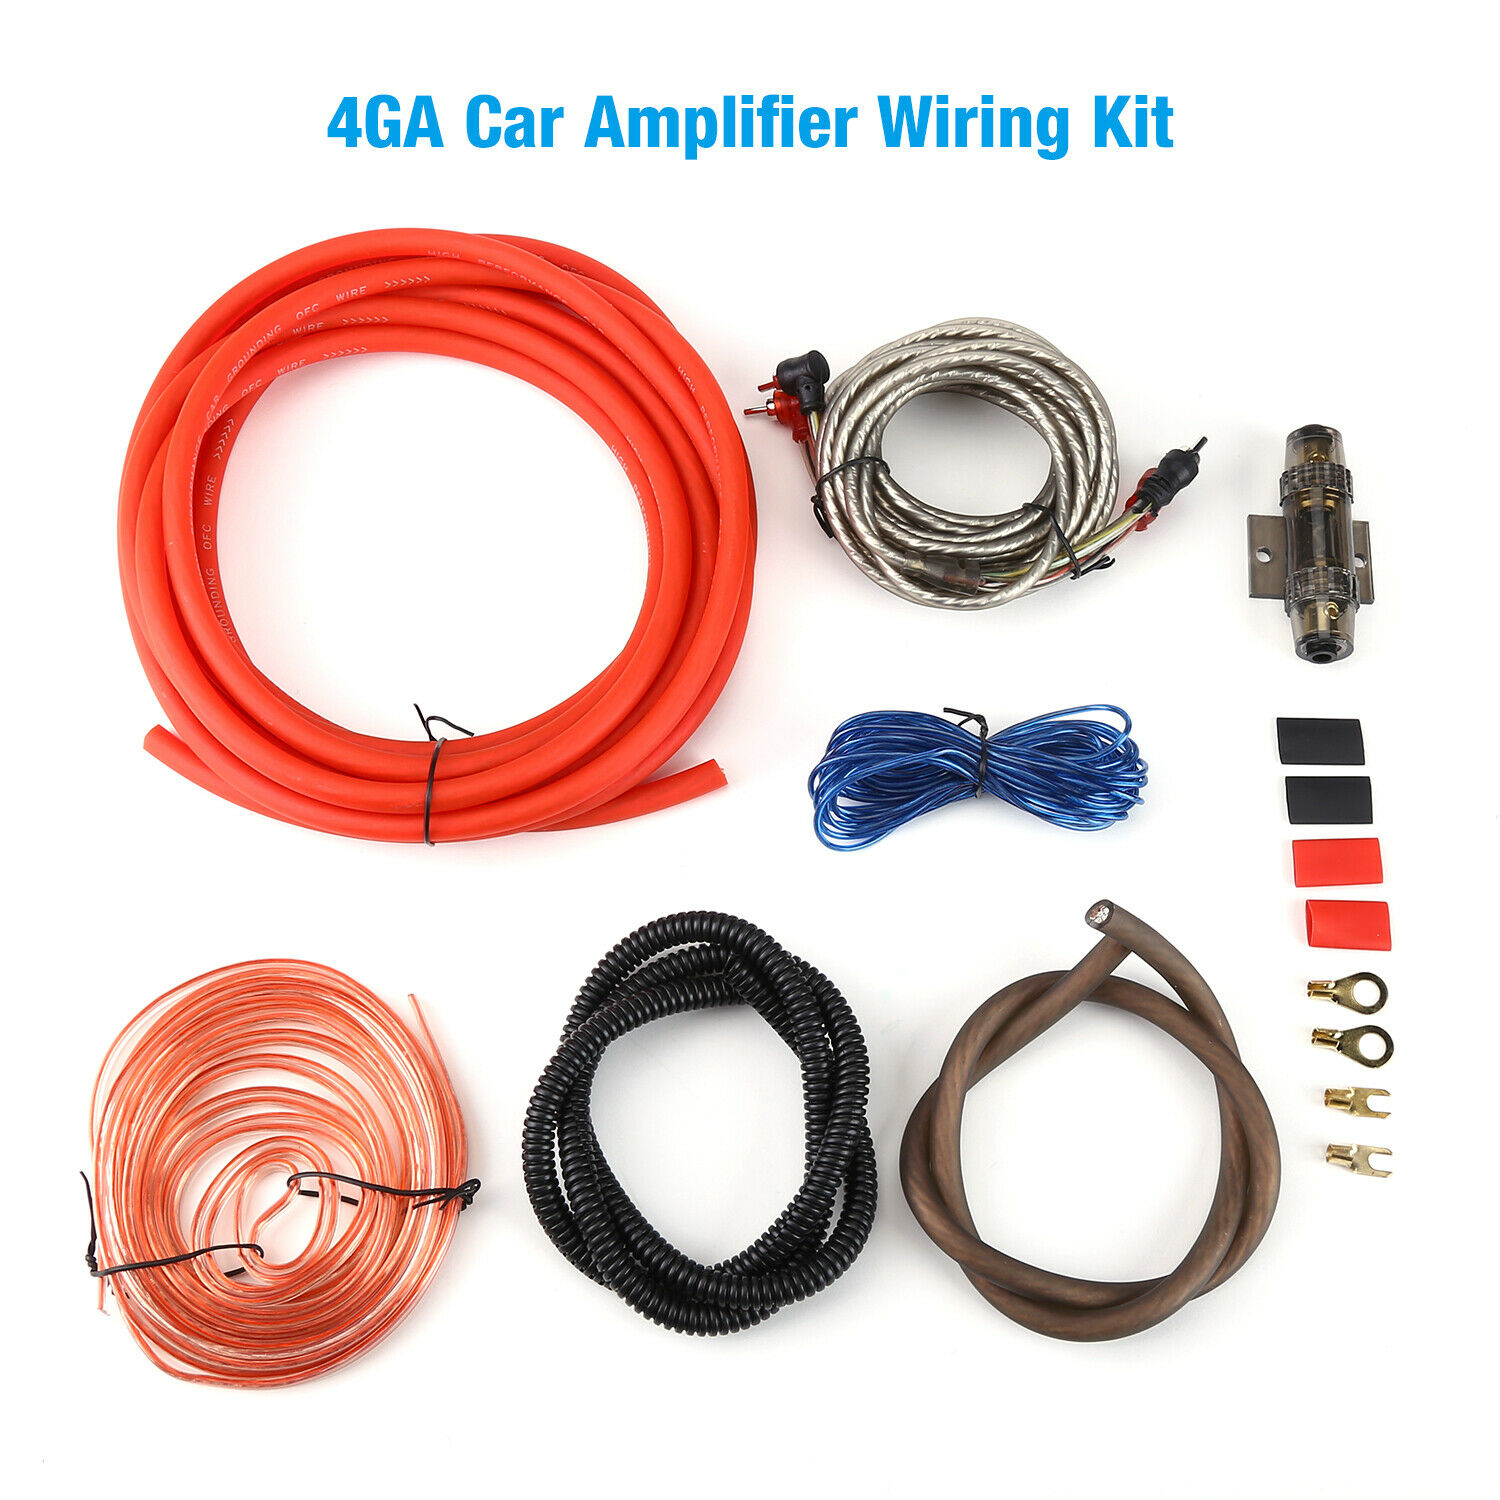 Auto Car Audio 4 Gauge Cable Kit Amp Amplifier Install Rca Subwoofer Sub Wiring